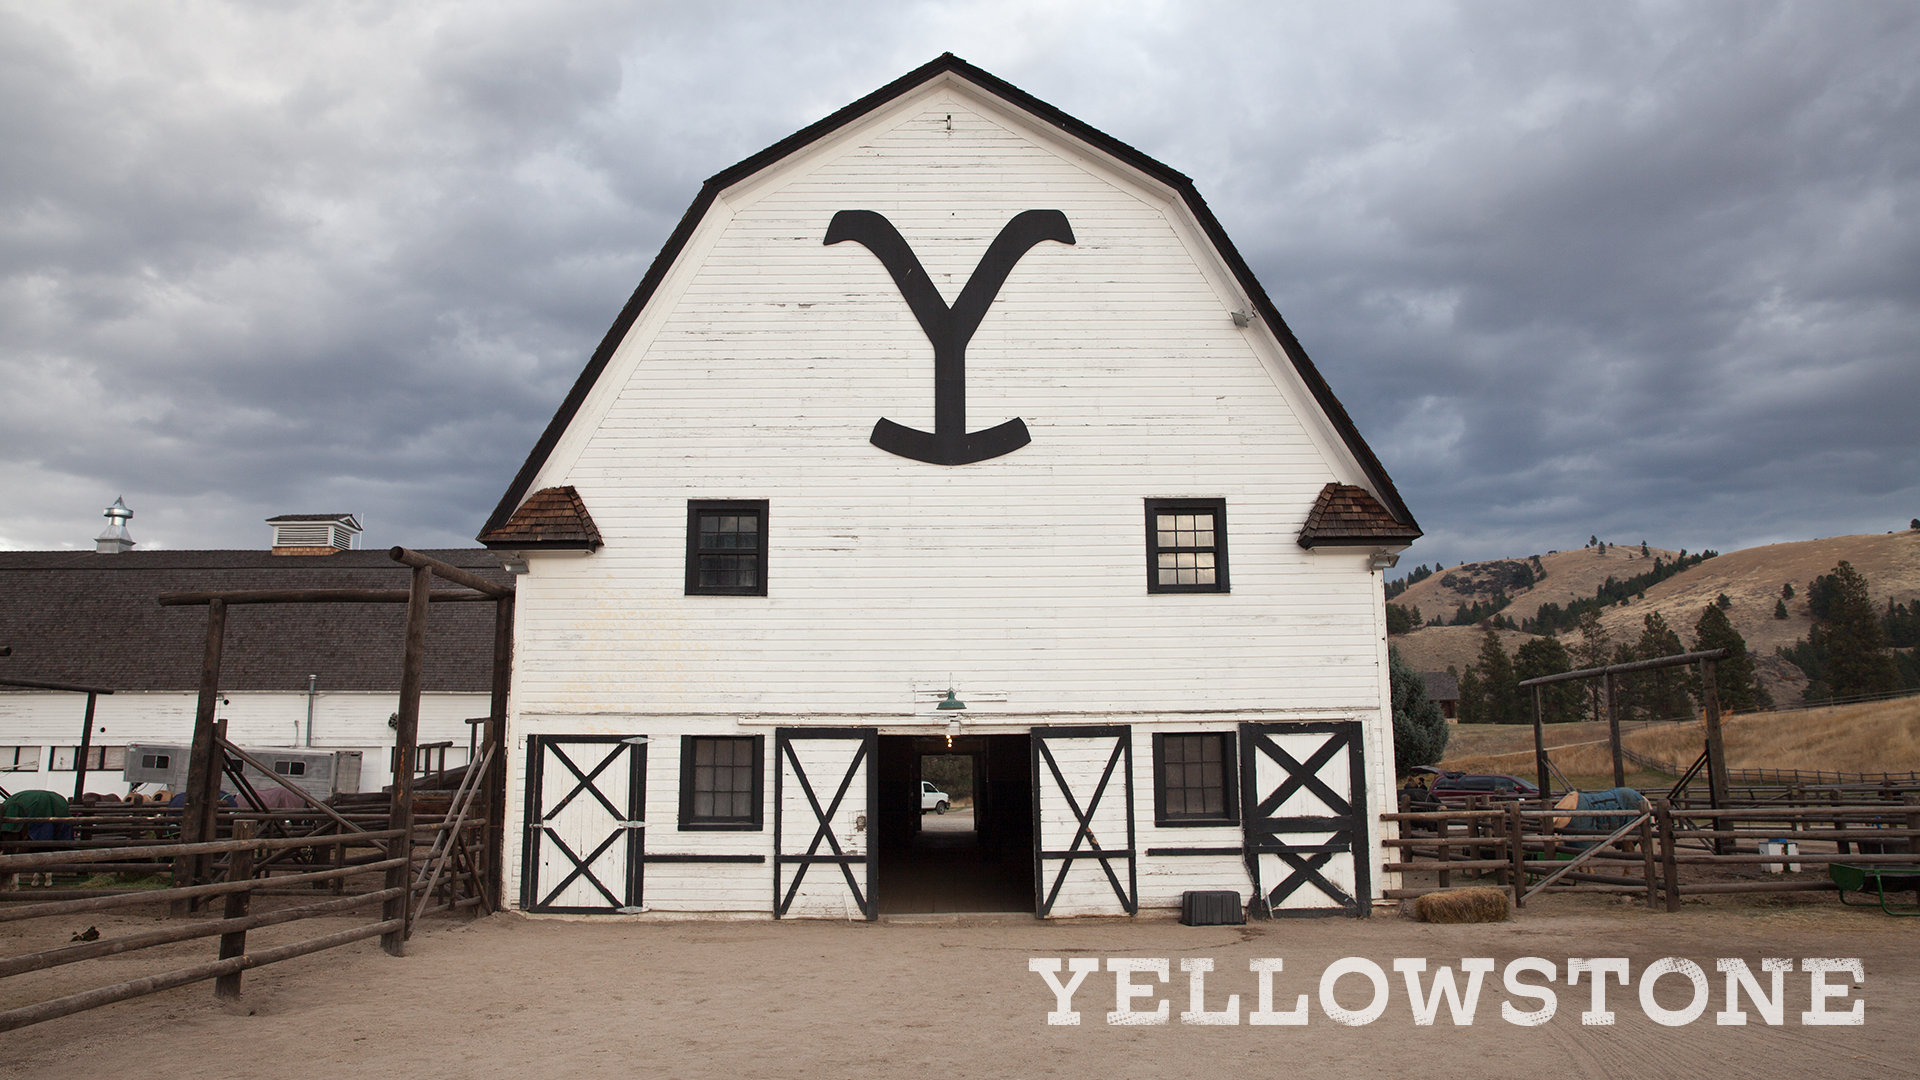 Yellowstone might not be able to go to the ranch, but you can bring the ranch to your next Zoom meeting! Check our replies for even more #YellowstoneTV background